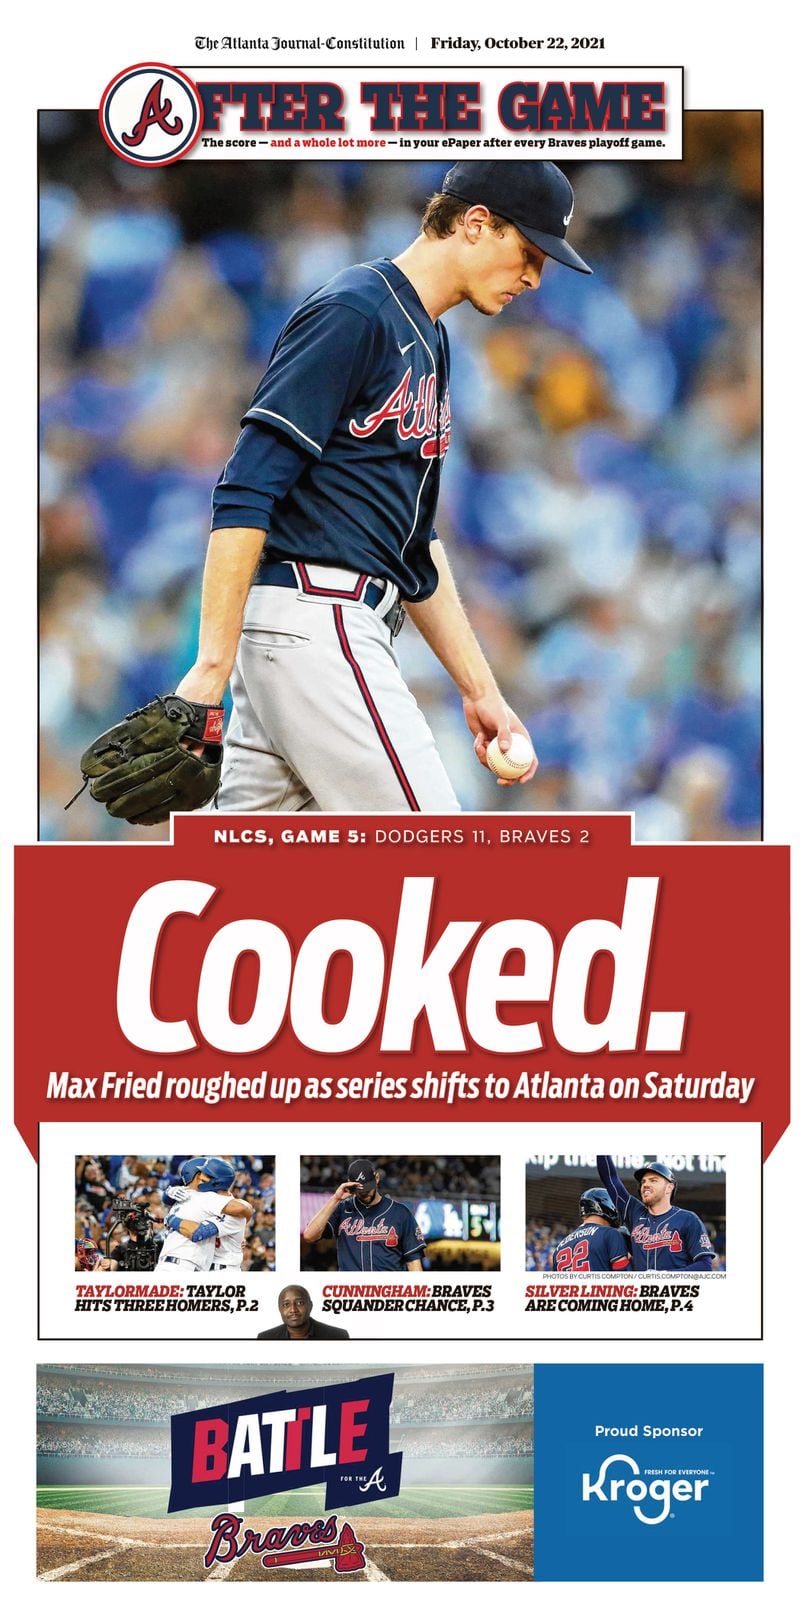 ‘Cooked.’ – Atlanta Braves game section in today’s ePaper